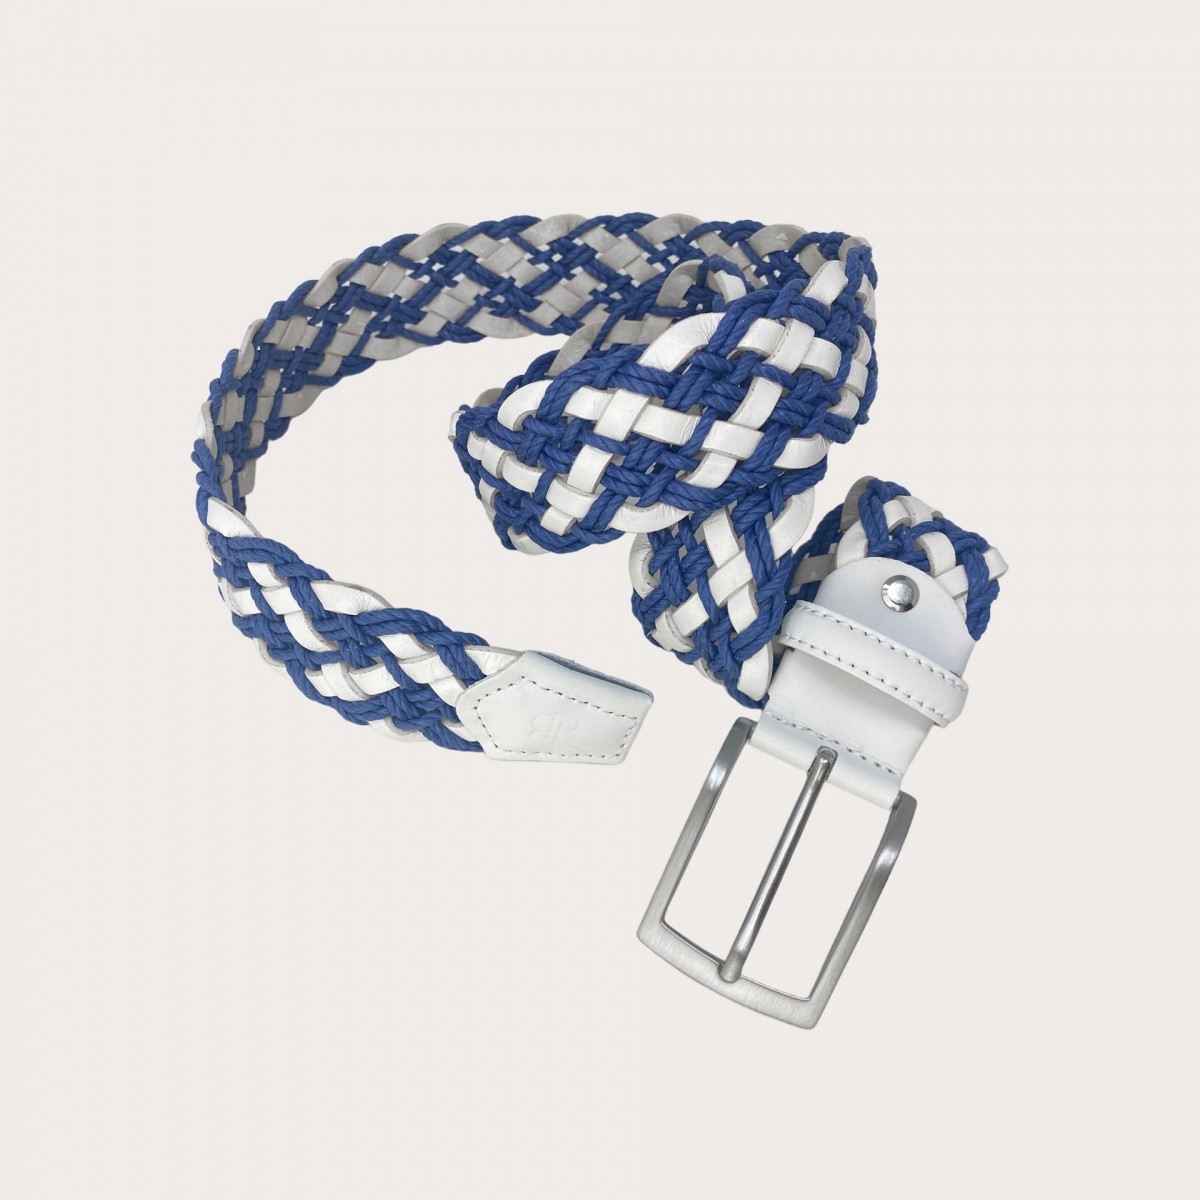 BRUCLE Braided white and blue leather and cotton belt